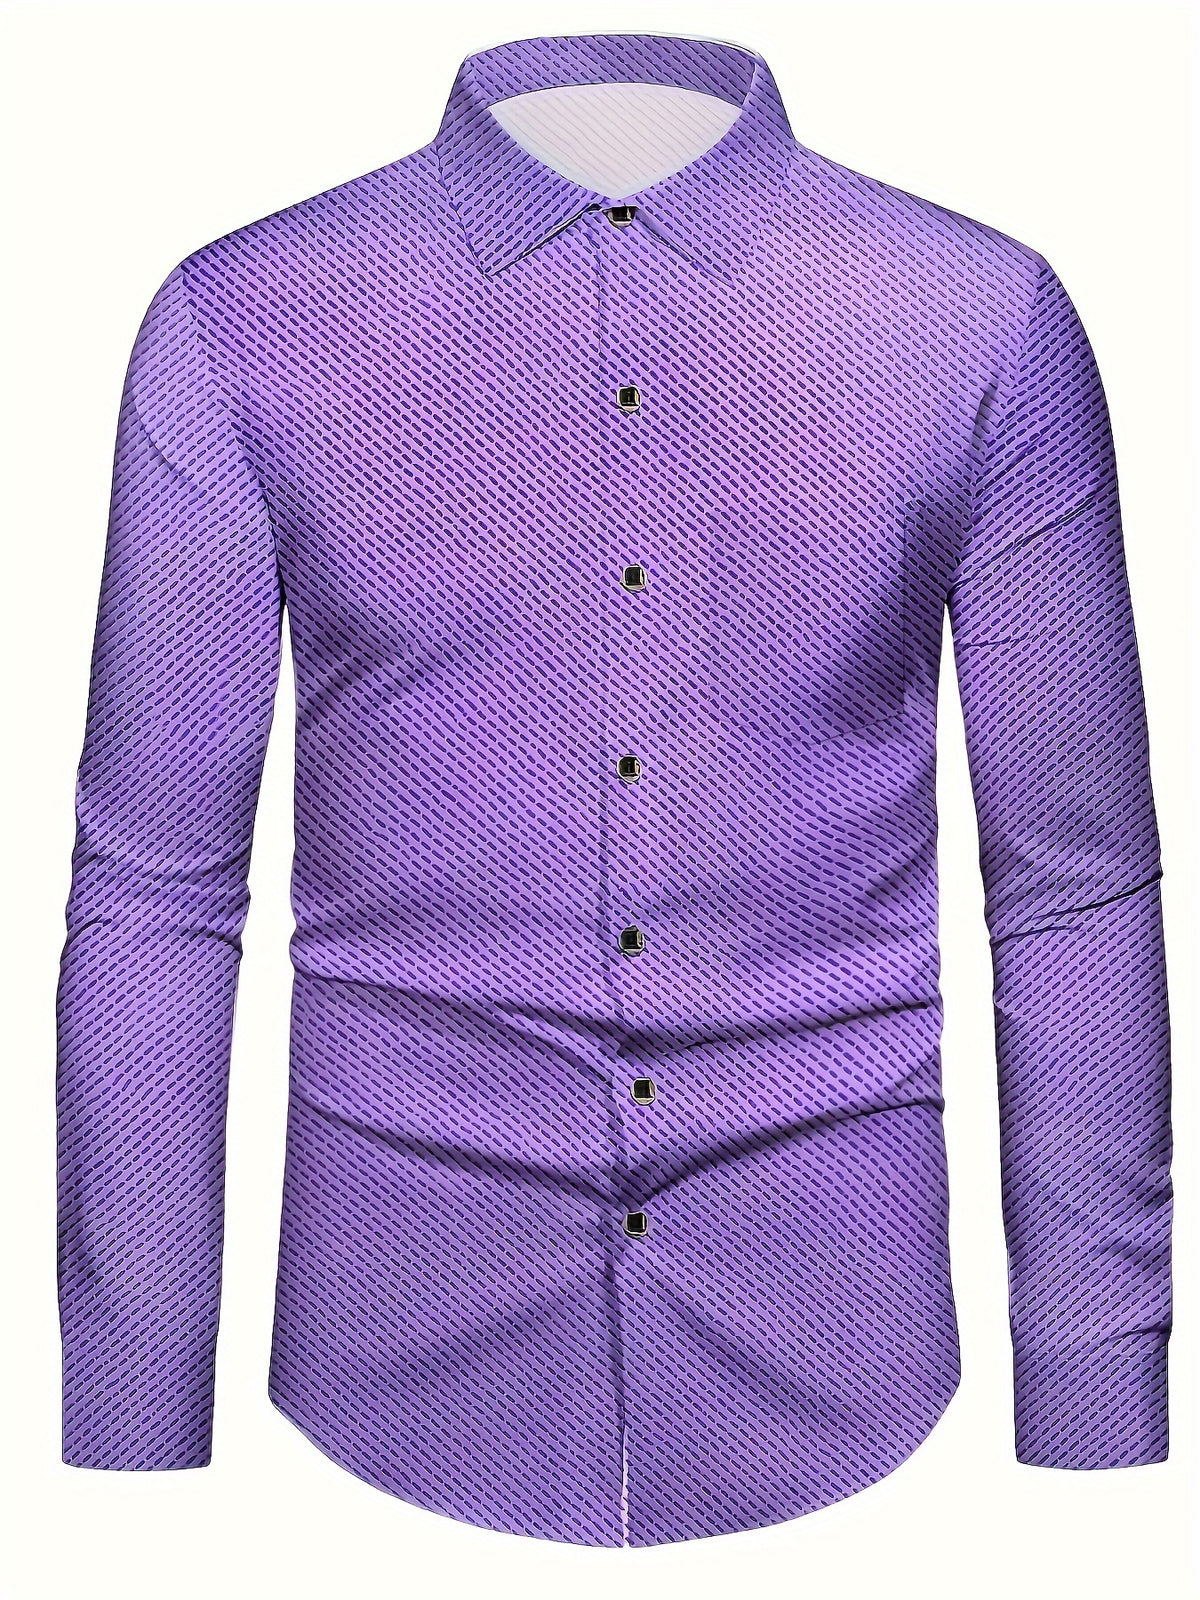 a purple shirt with a pattern on it